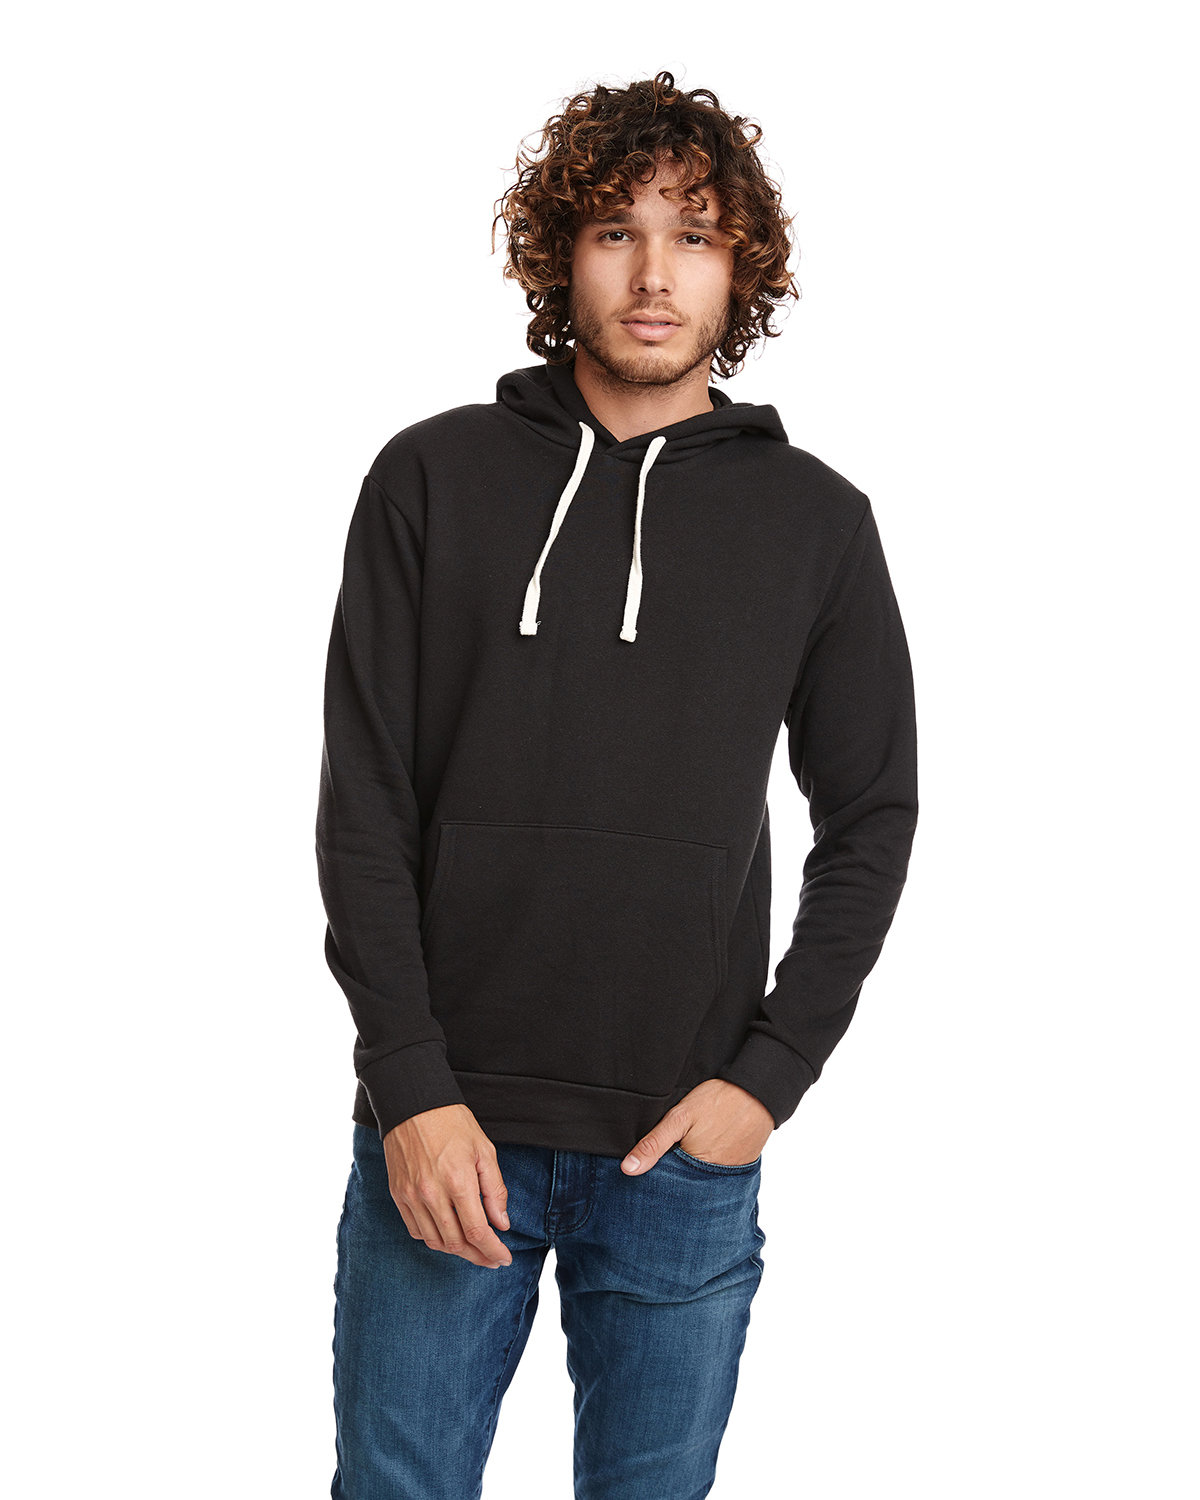 The Next Level Pullover Hood 9303 